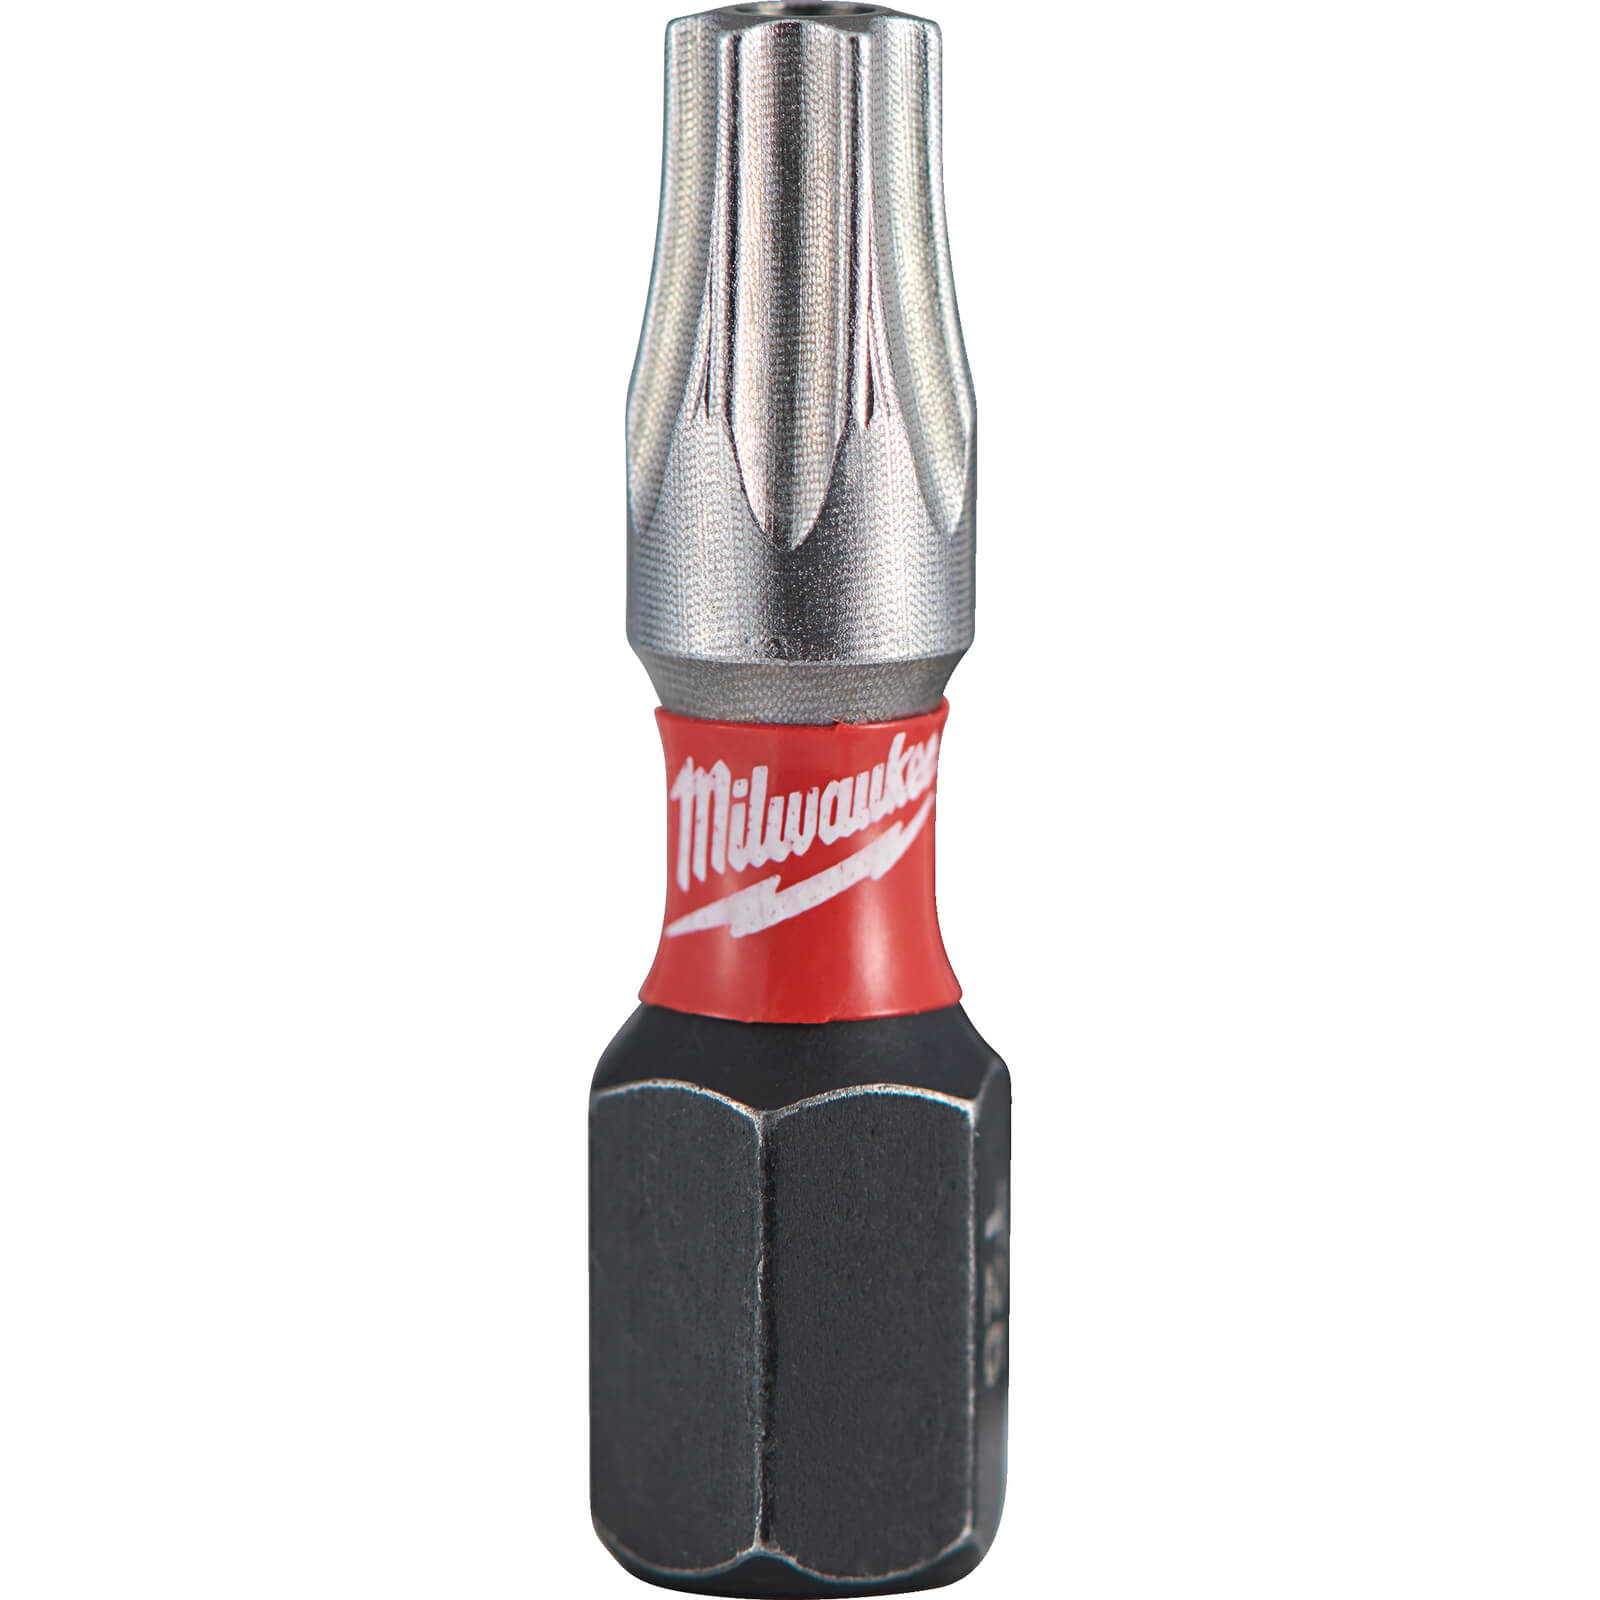 Image of Milwaukee Shockwave Impact Duty Security Torx Screwdriver Bits TX BO25 25mm Pack of 2